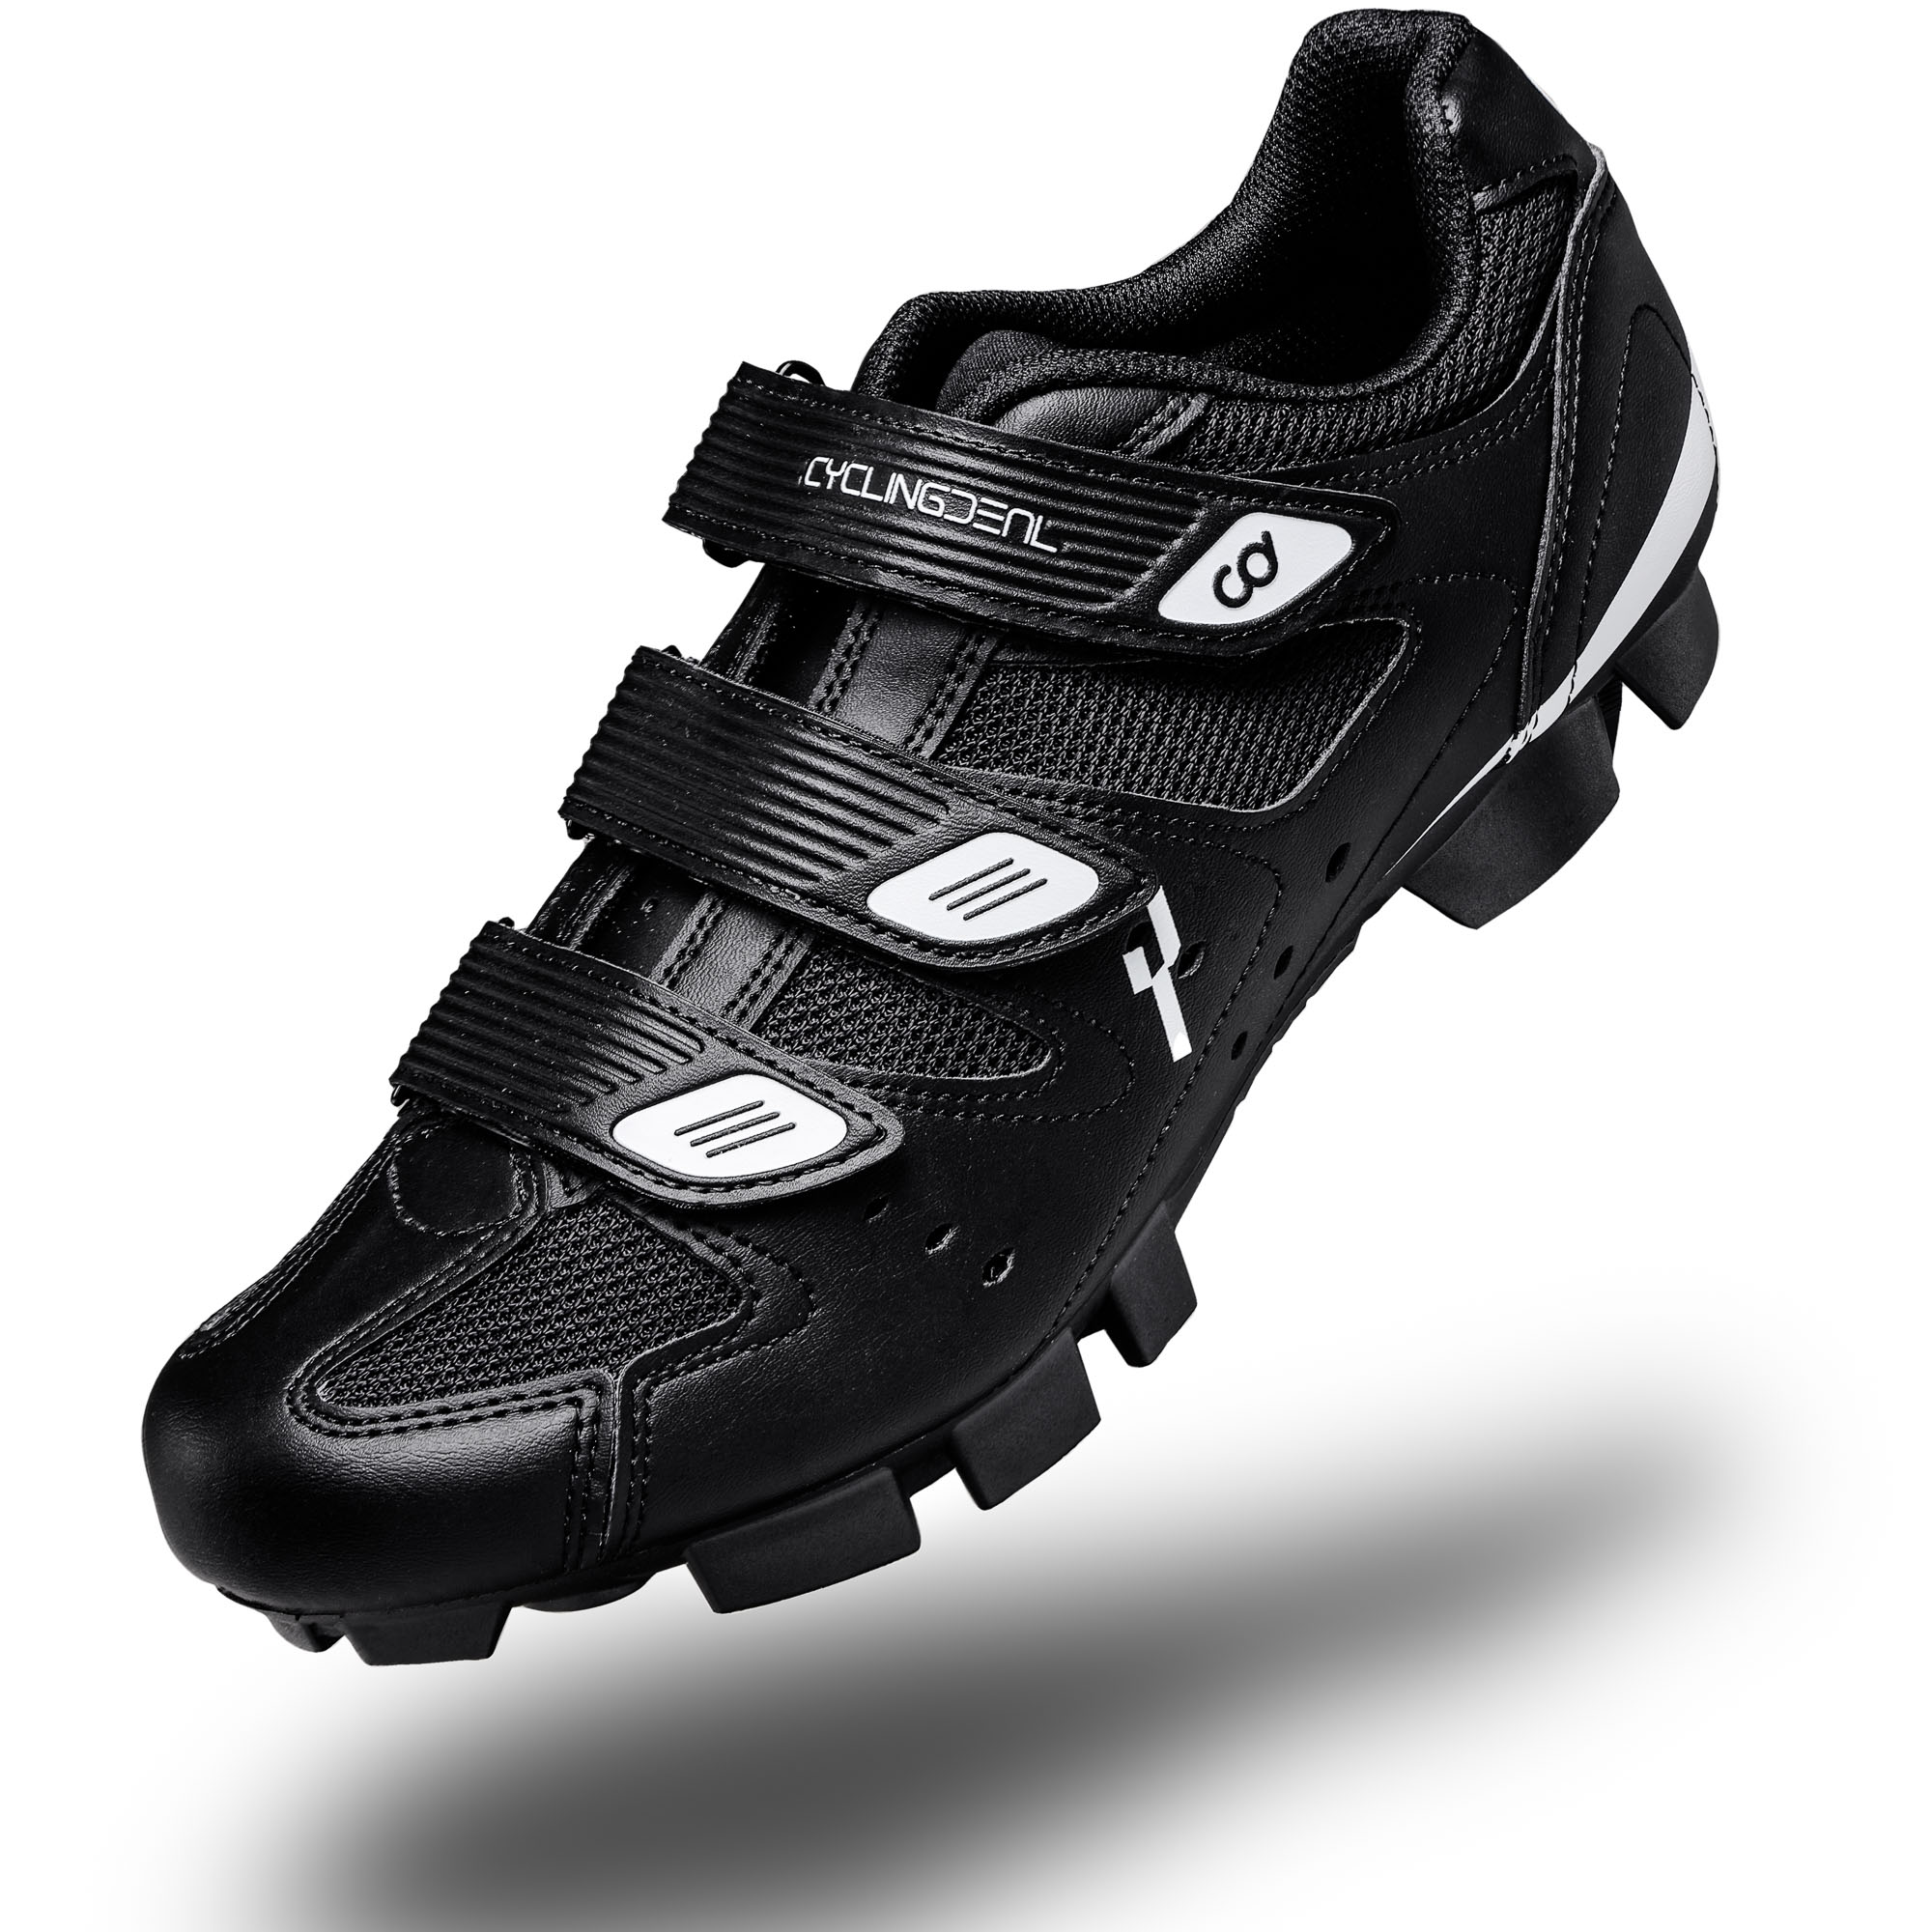 CyclingDeal Mountain Bicycle Bike Men's MTB Cycling Shoes Black Compatible with SHIMANO SPD and CrankBrothers Cleats | Size 41